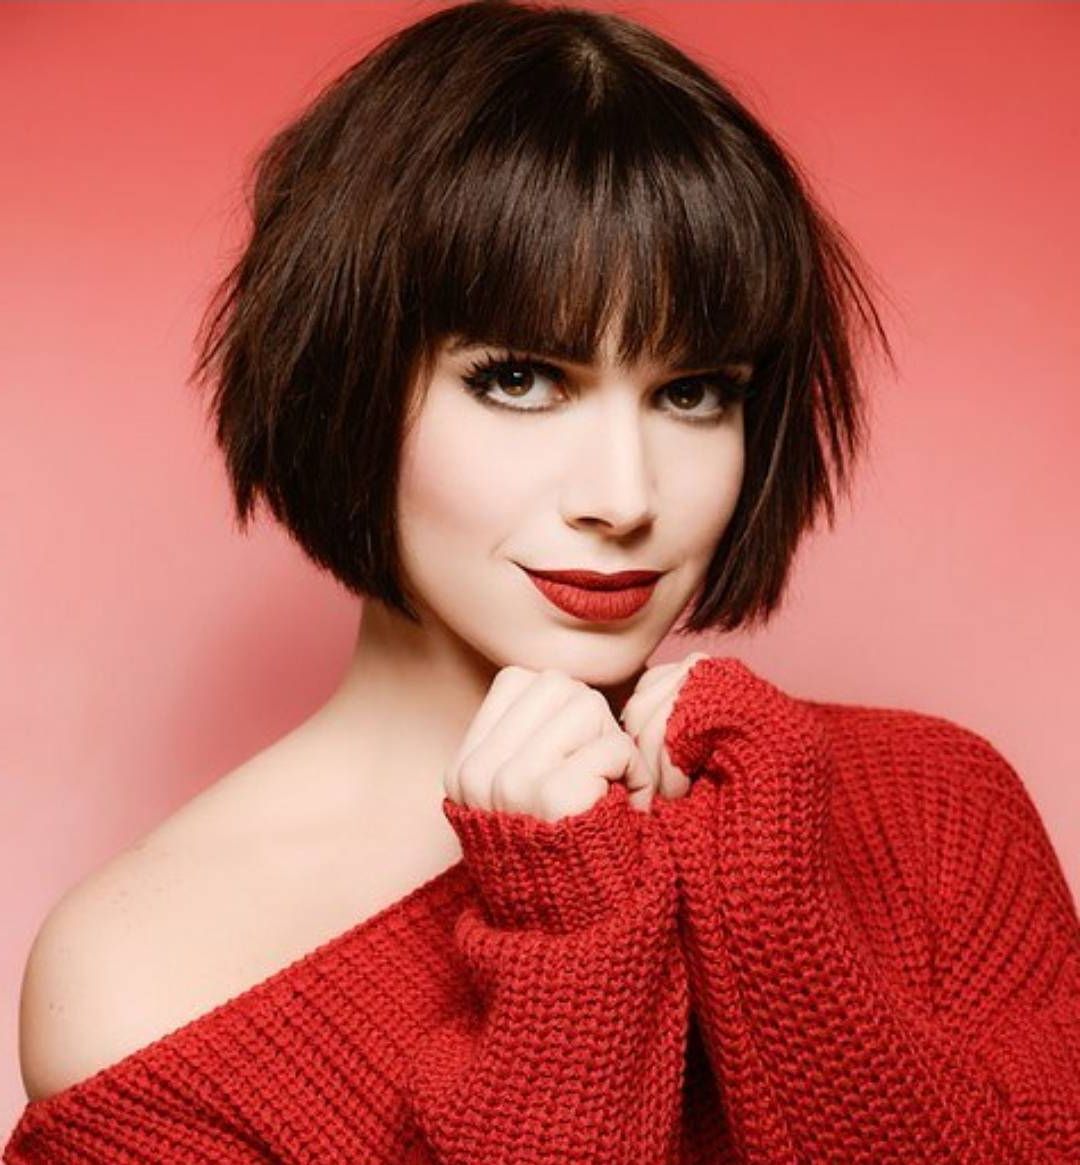 10 Chic Short Bob Haircuts That Balance Your Face Shape! With Jaw Length Bob Hairstyles With Layers For Fine Hair (View 19 of 20)